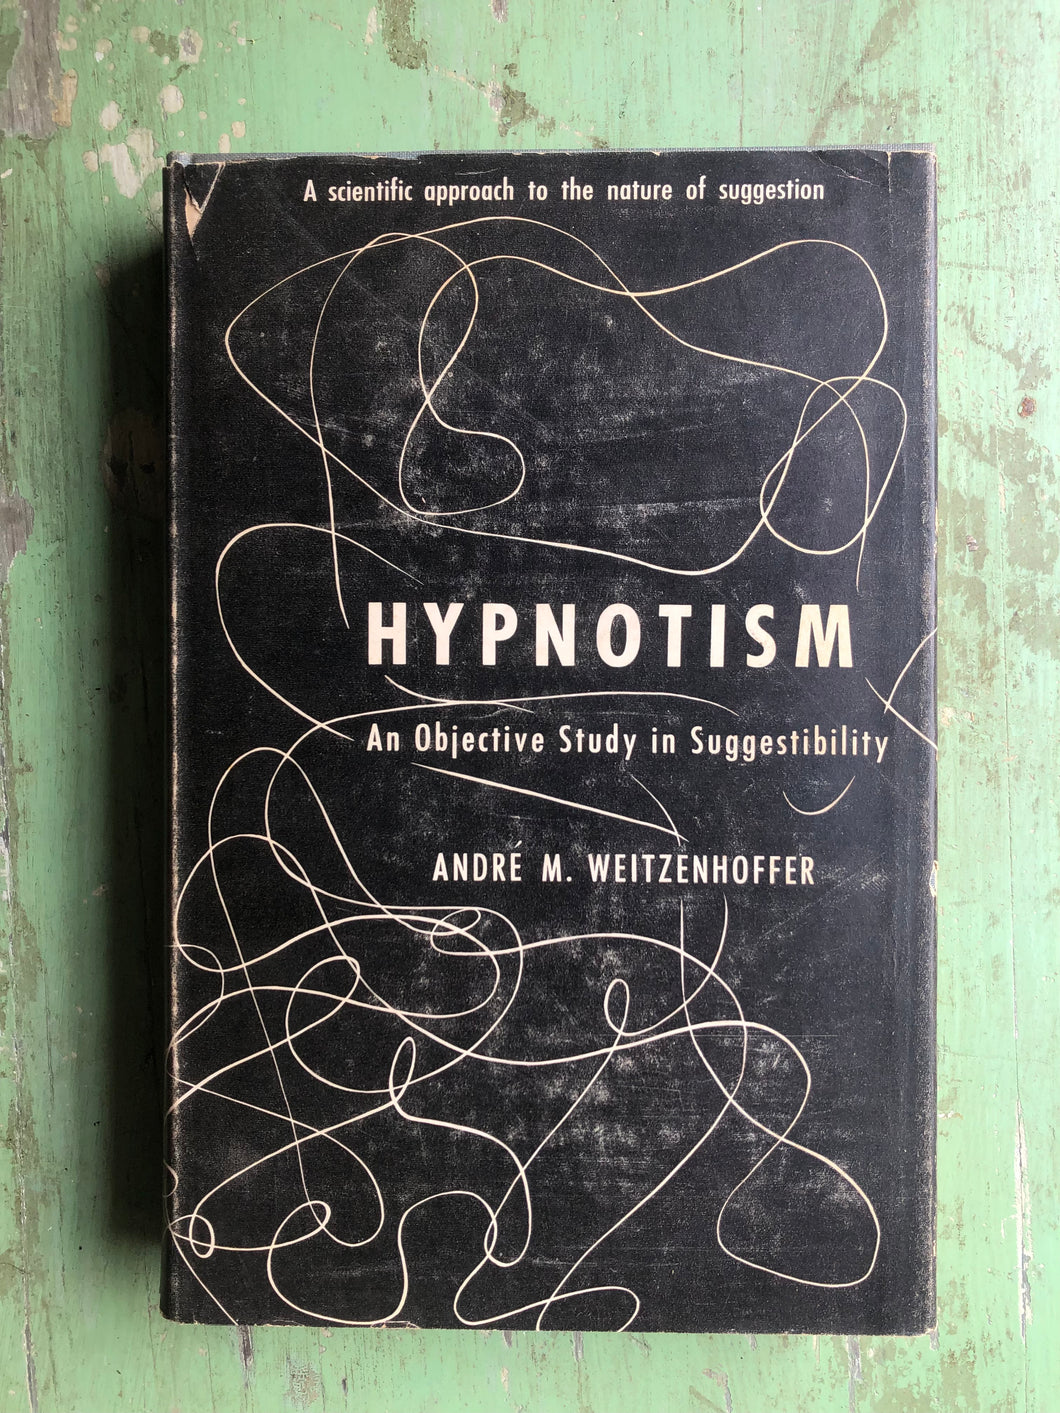 Hypnotism: An Objective Study in Suggestibility by Andre M. Weitzenhoffer